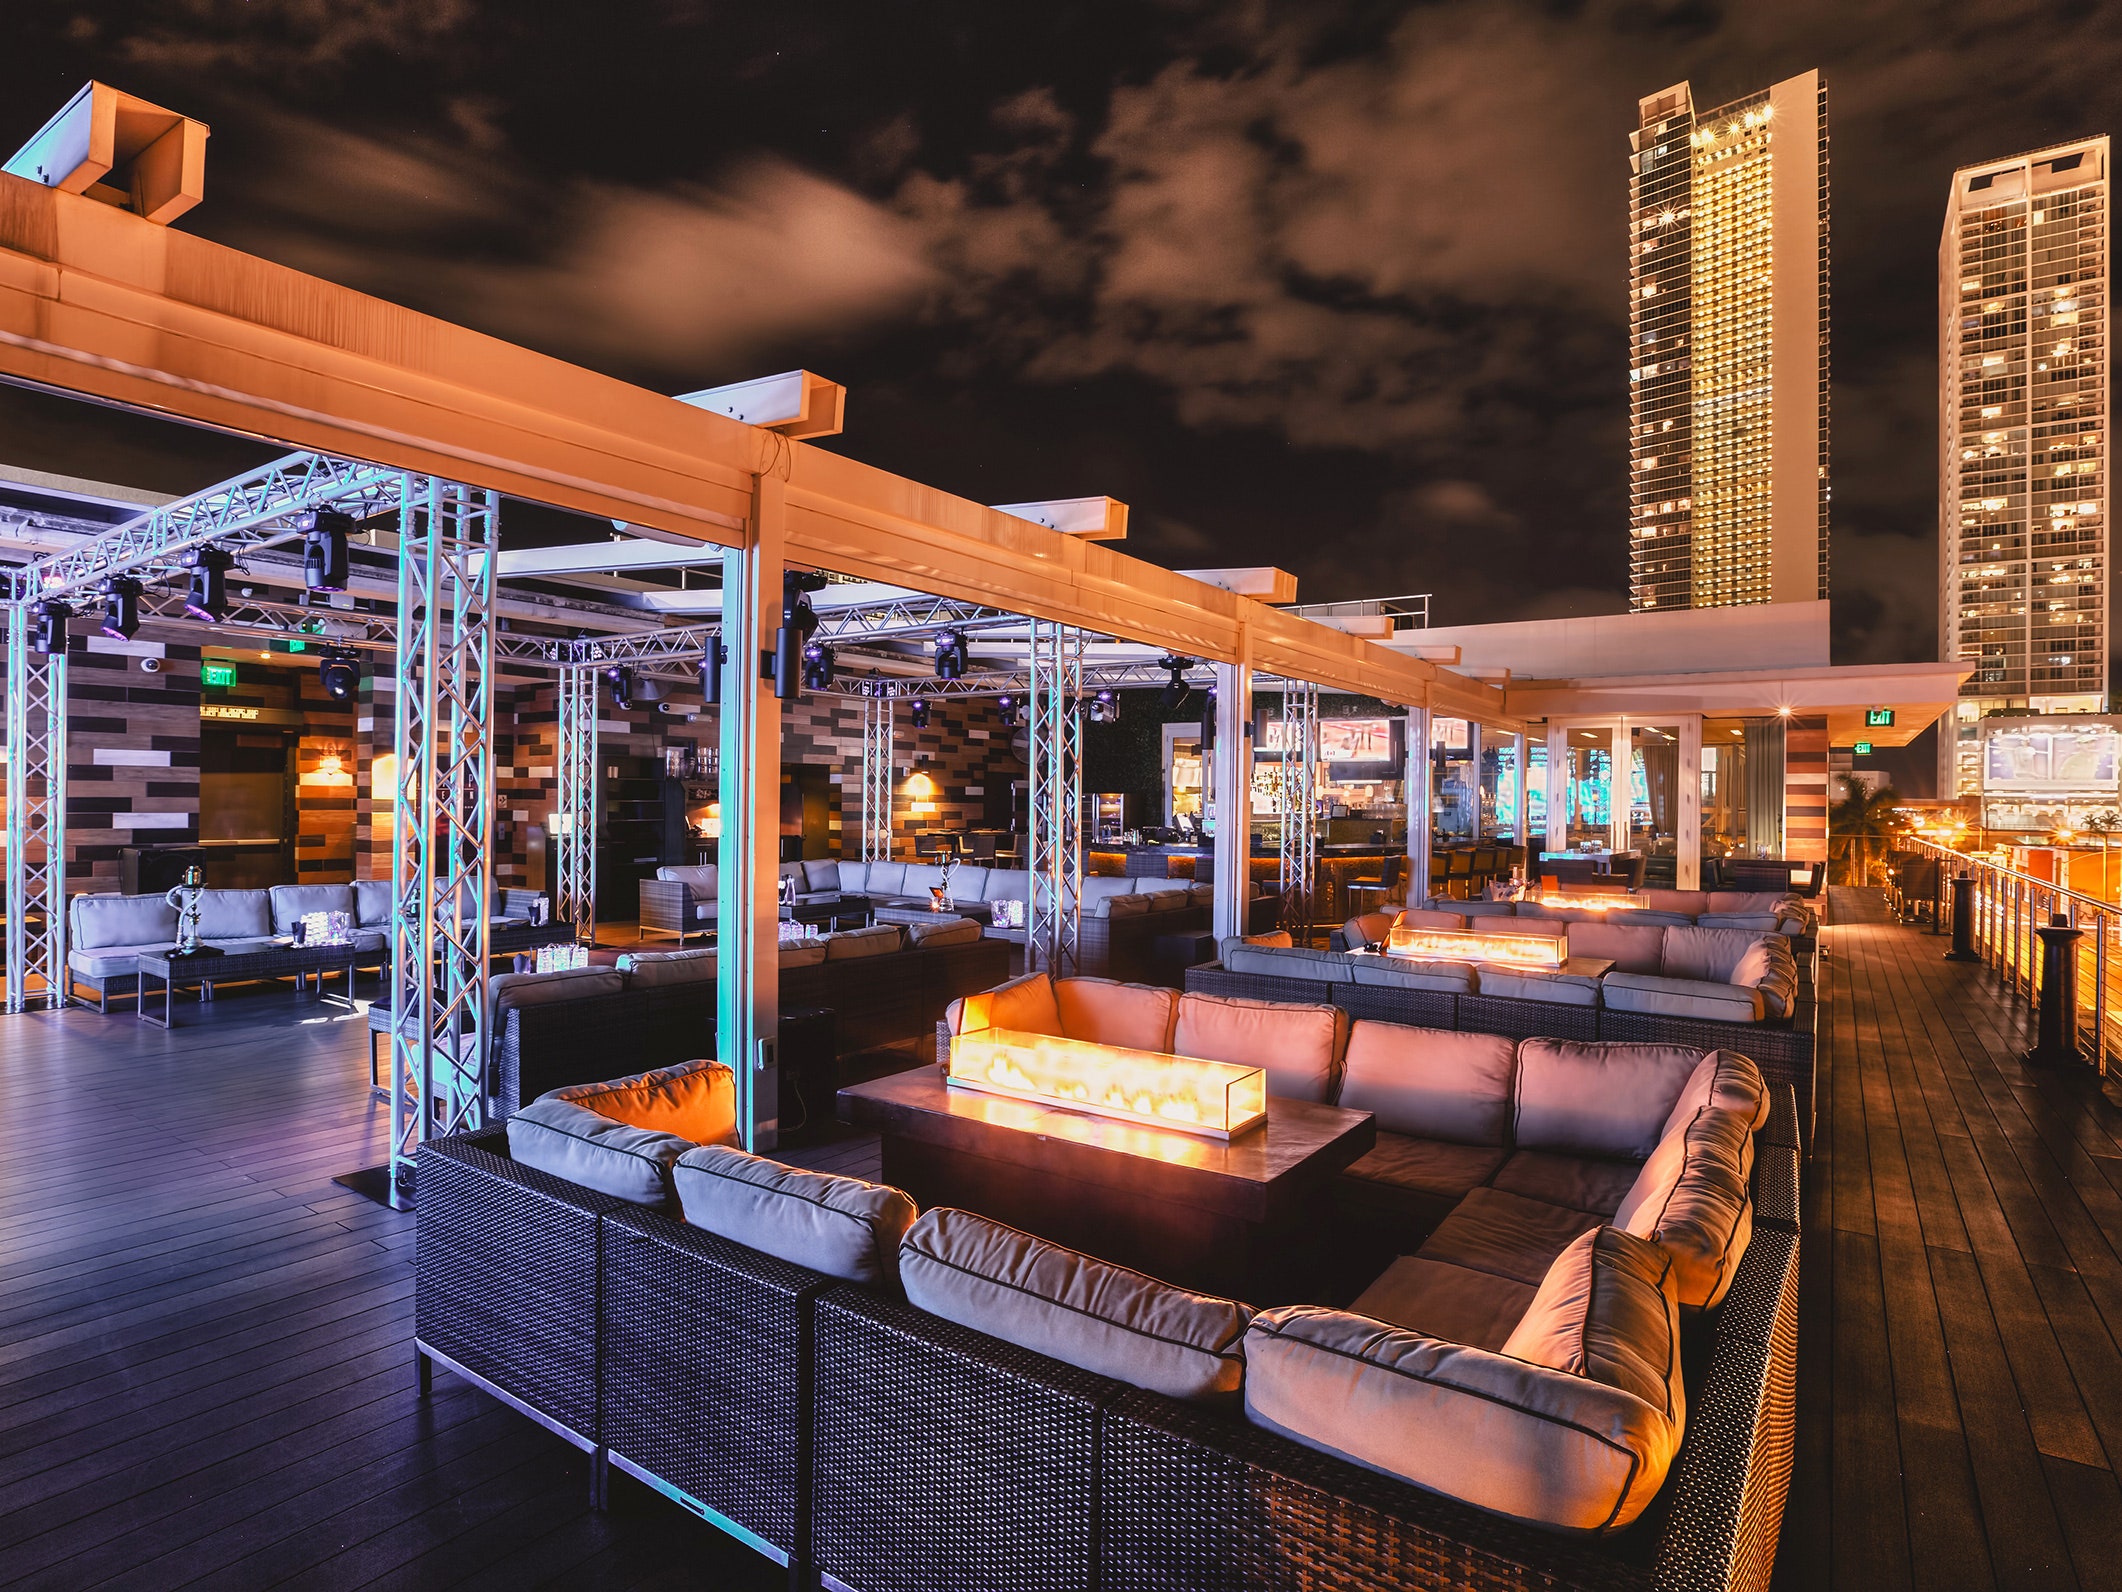 Rooftop at night with neon lights and lowered couches with high rise buildings in the background